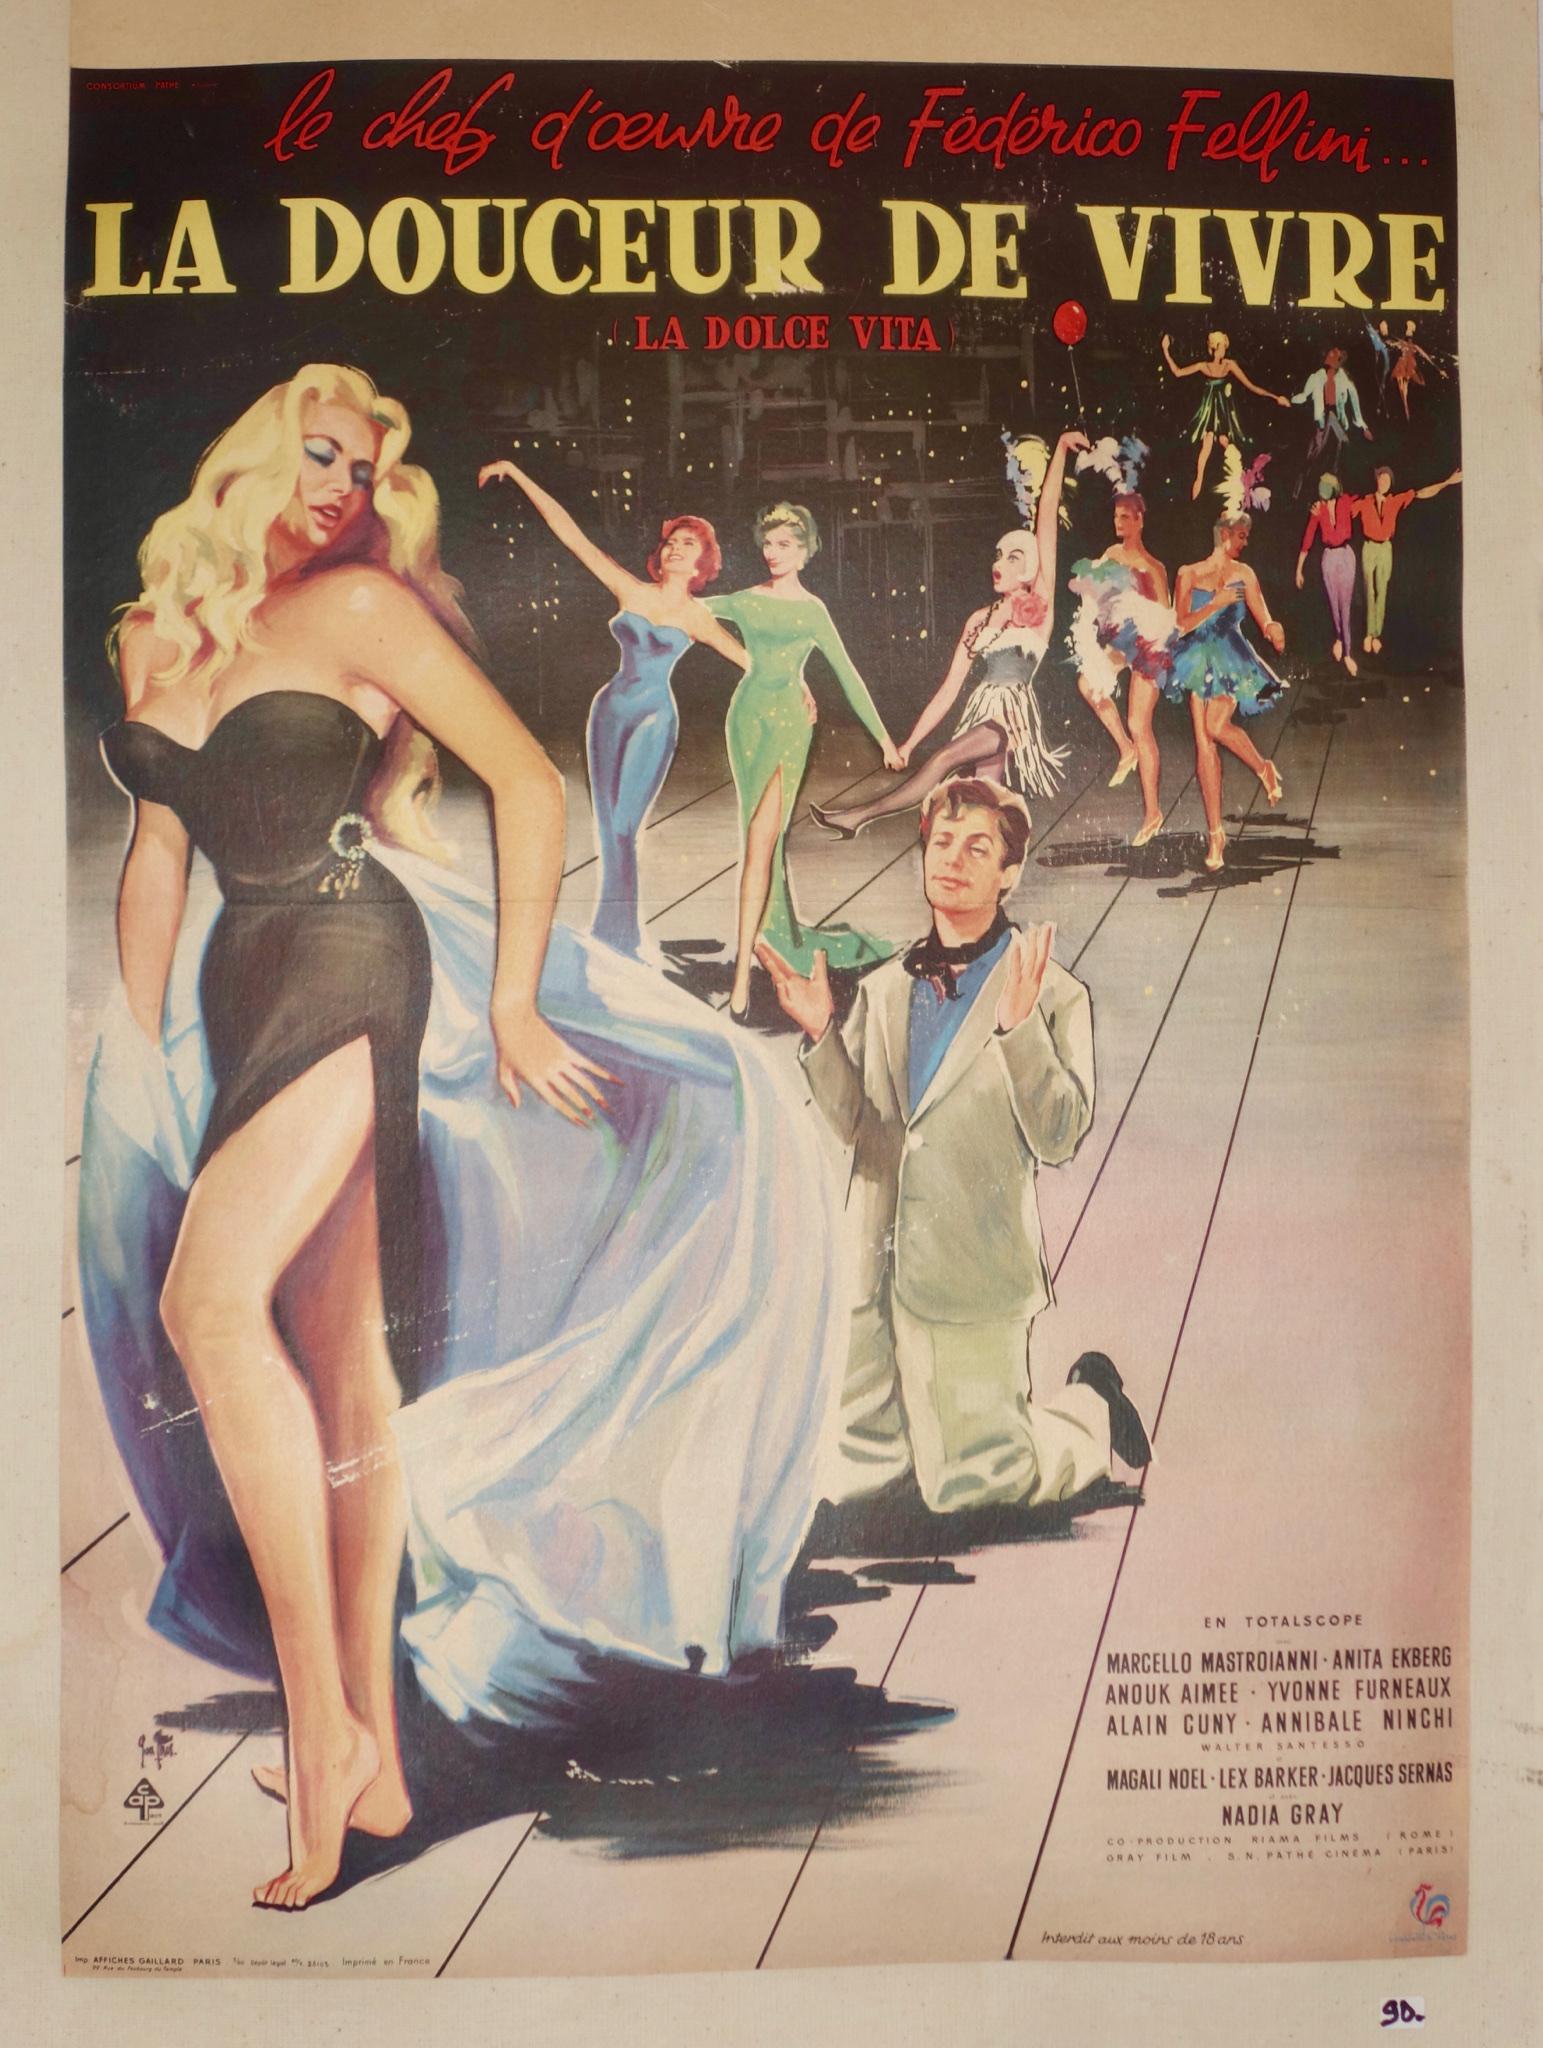 Paper 30 Year Collection of 4000 French Movie Posters, Ad Posters & Cinema Memorabilia For Sale